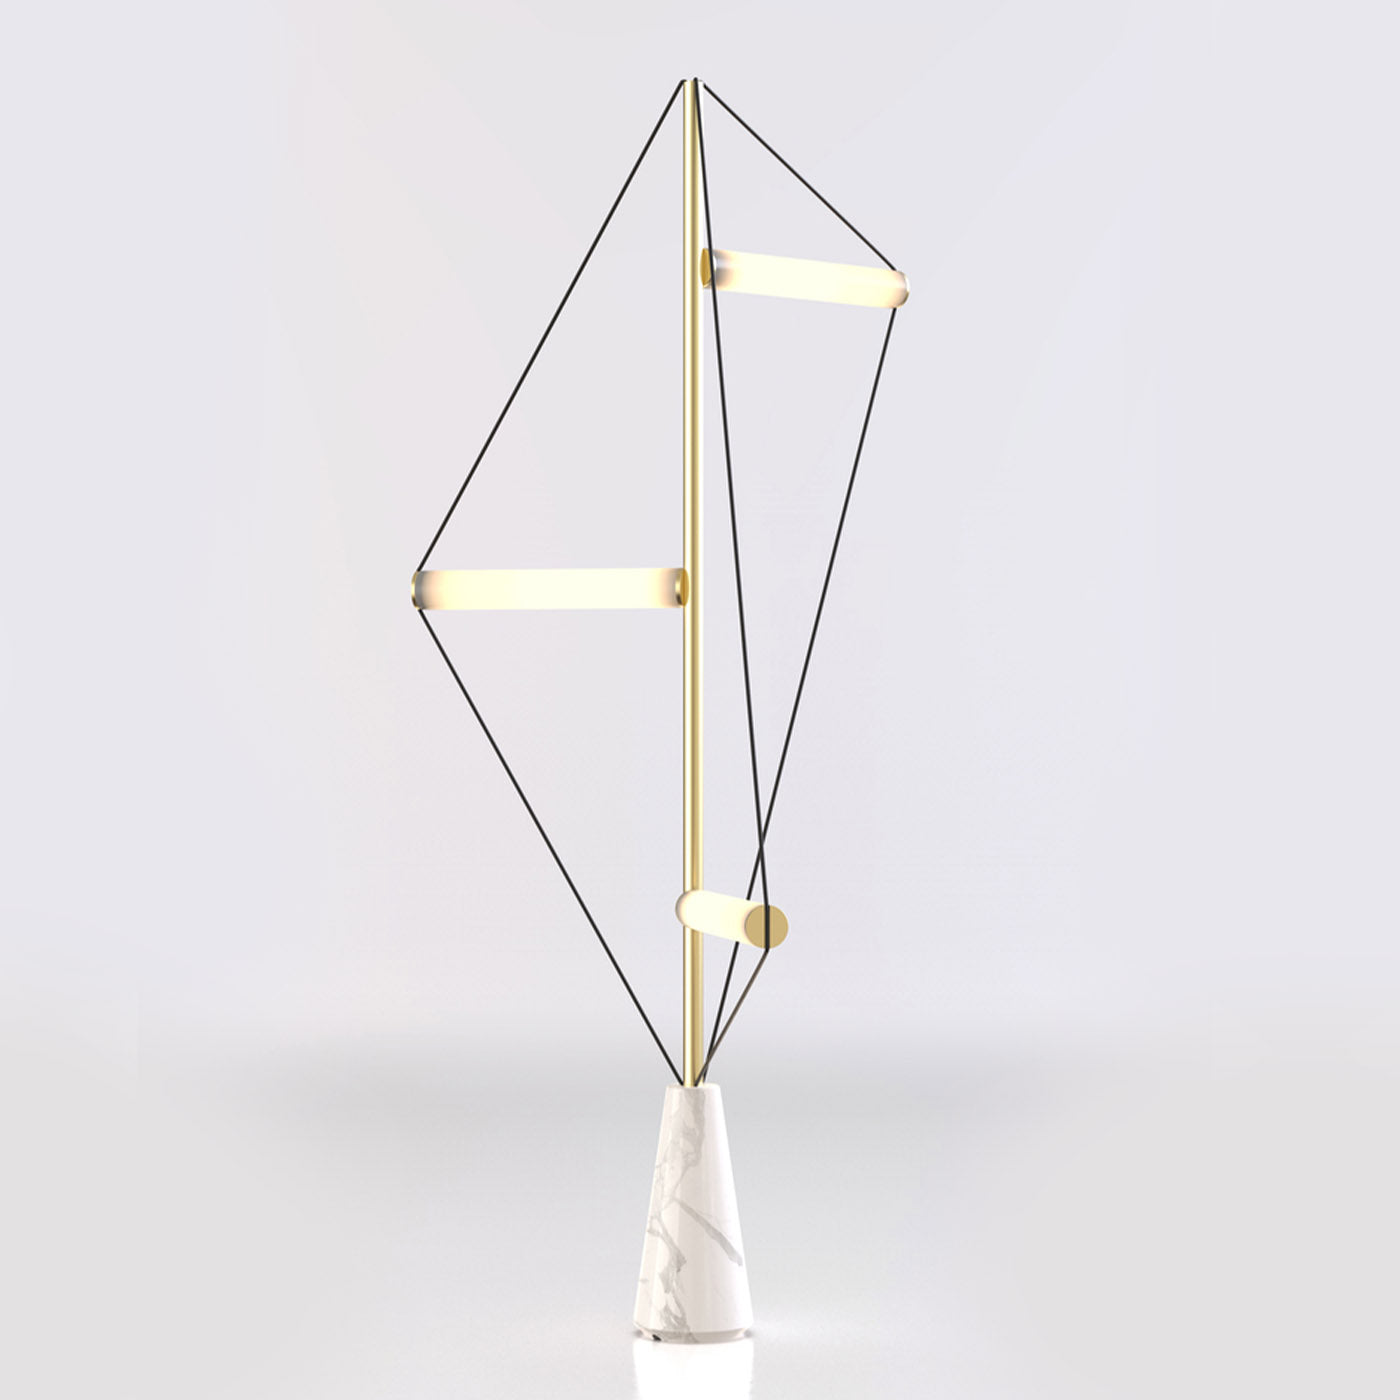 Ed047 Brass Floor Lamp with White Base - Alternative view 1